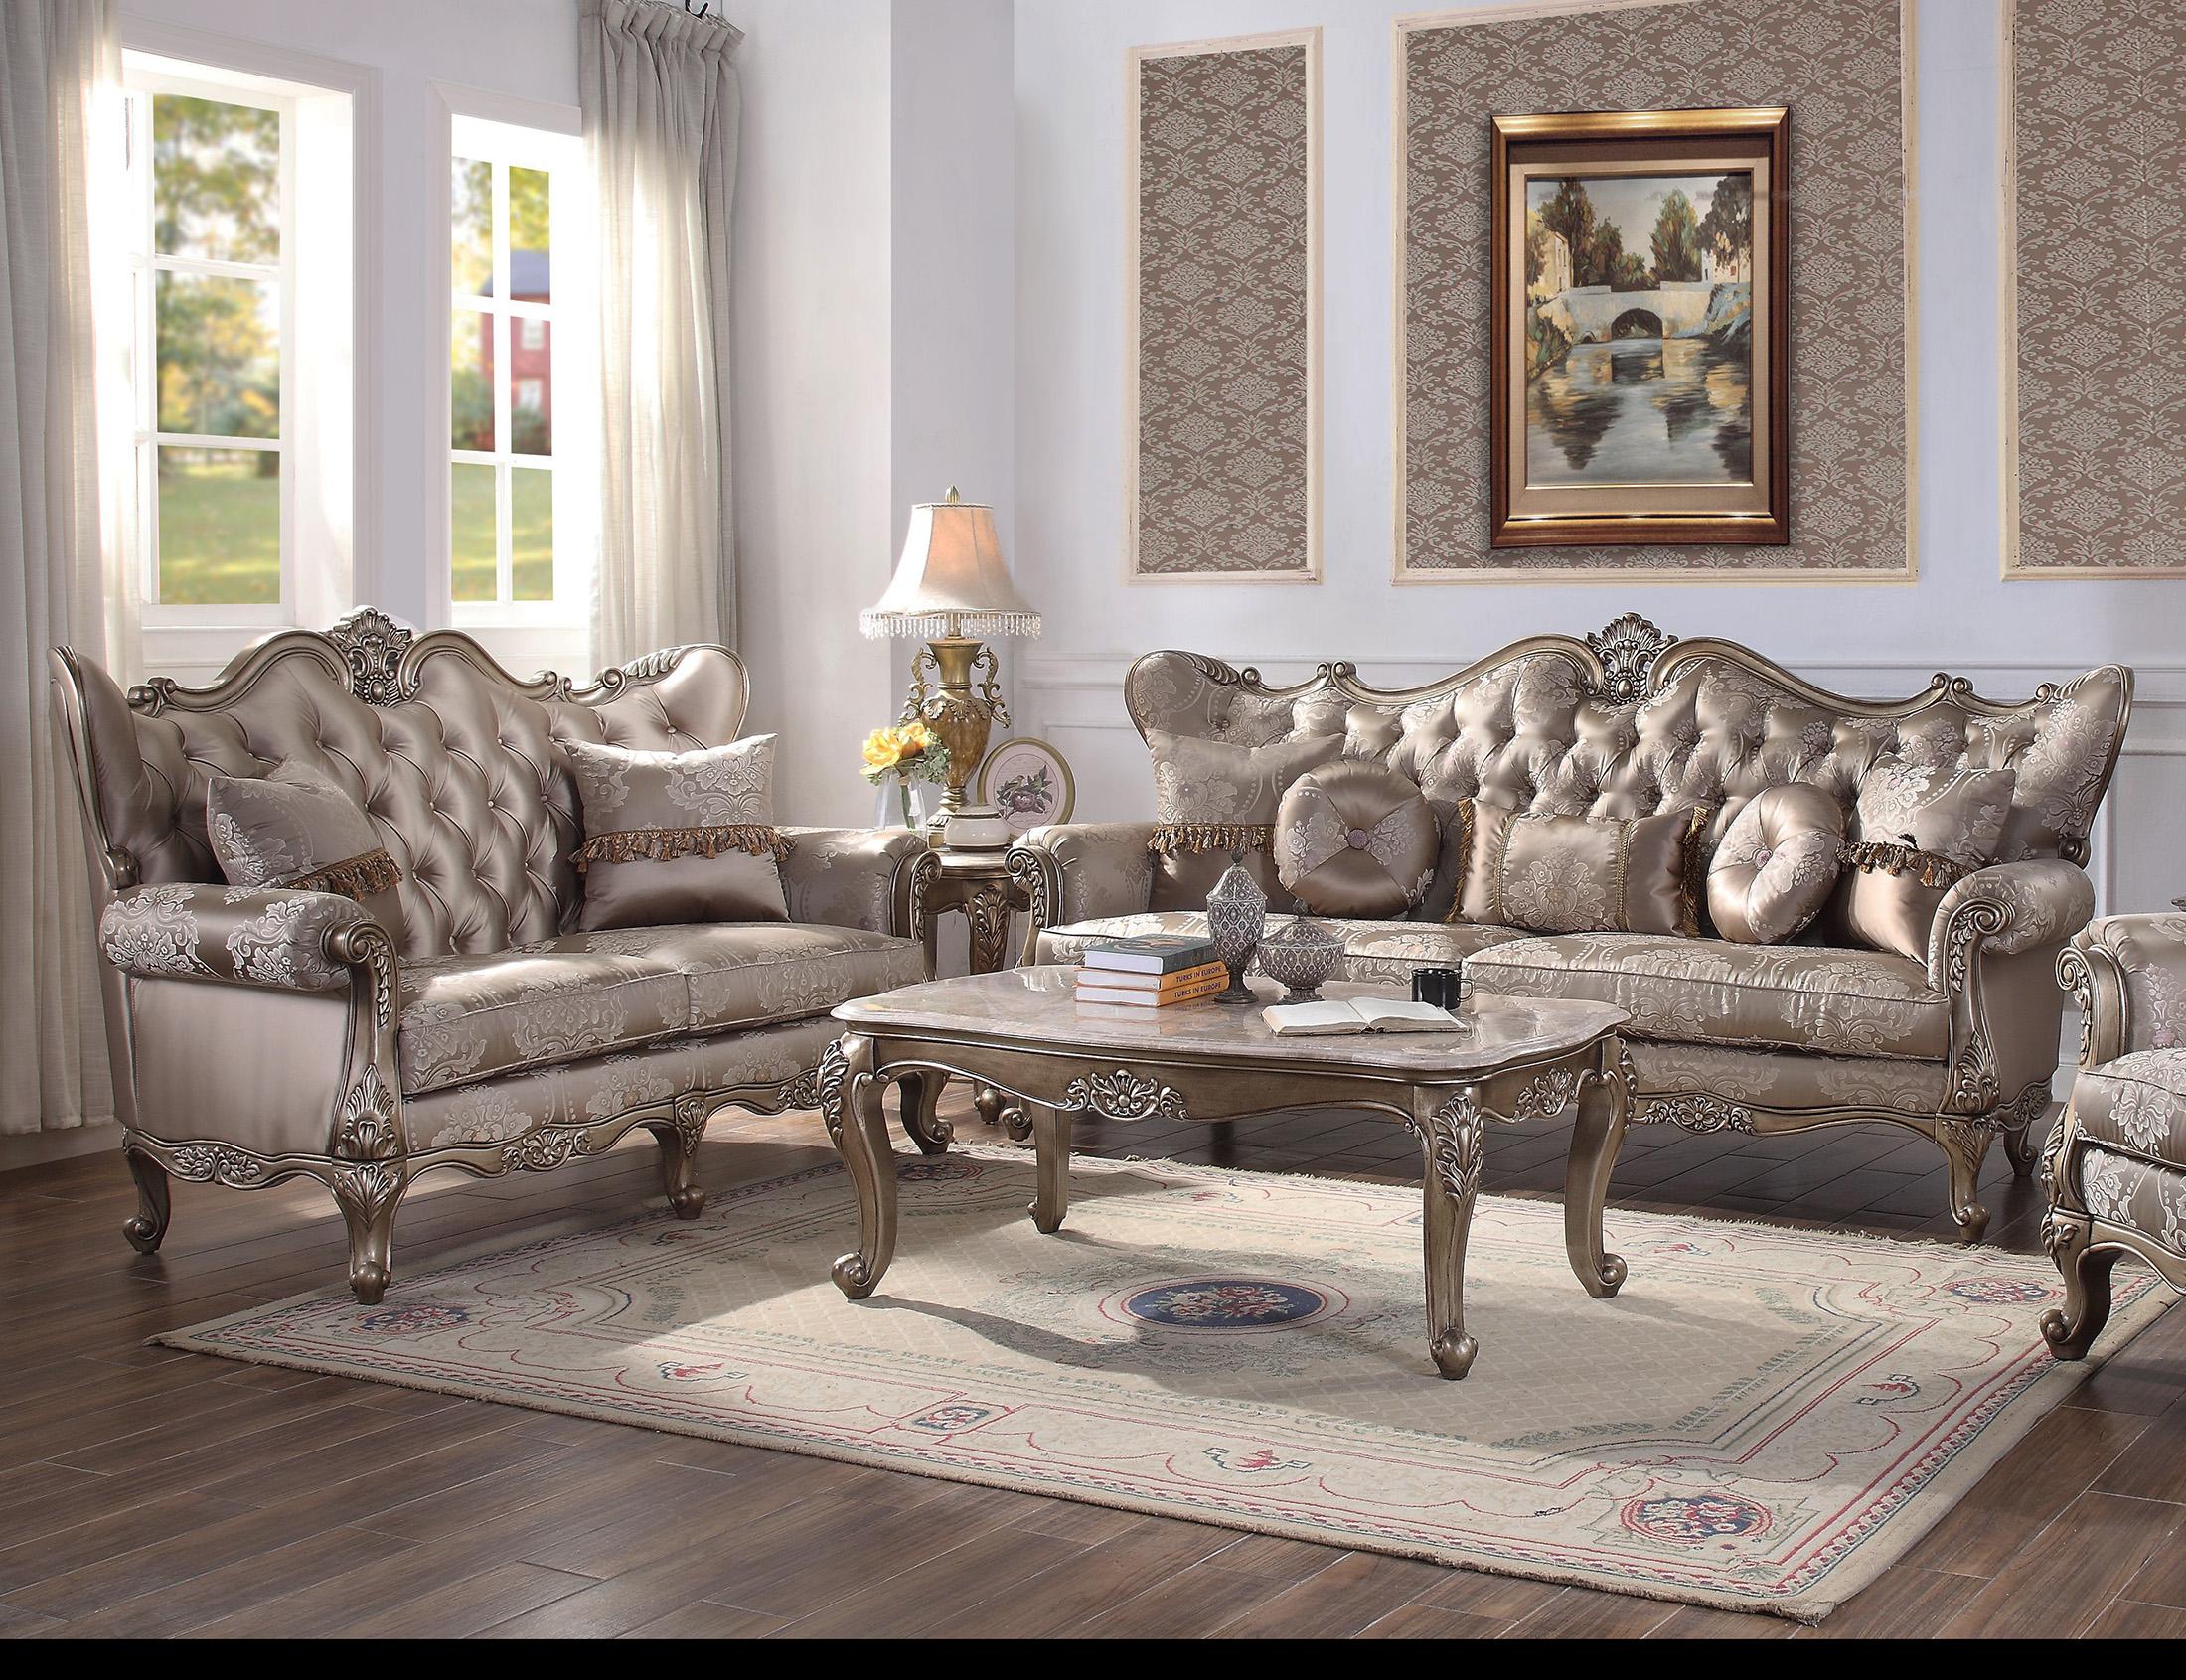 Traditional,  Vintage Sofa Set Jayceon 54865 54865-Set-2 Jayceon in Champagne Fabric